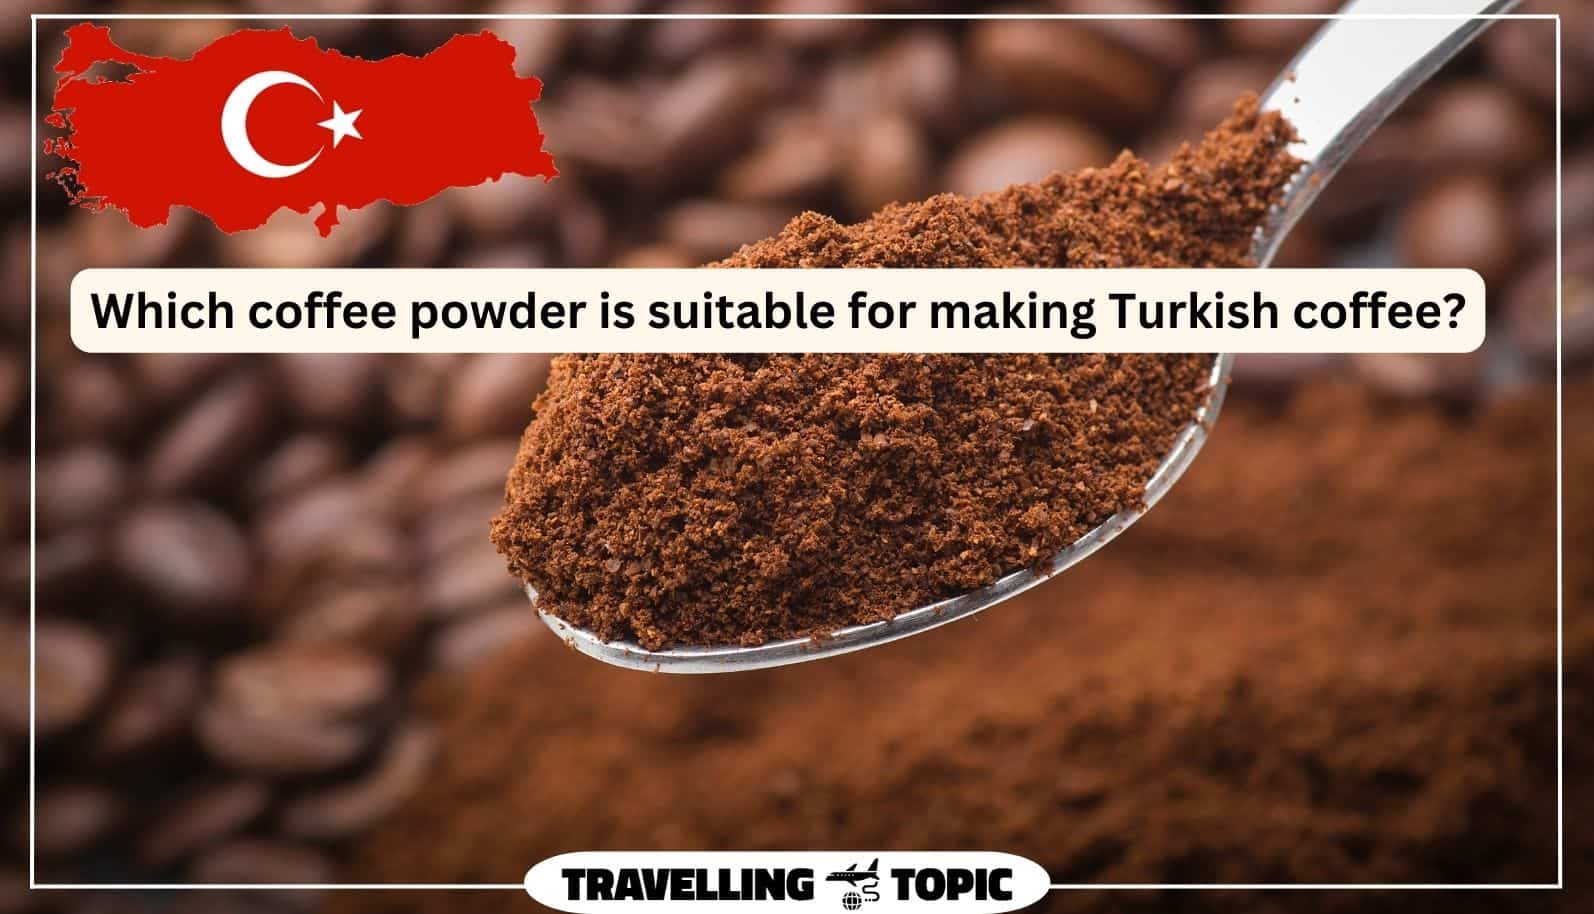 Which coffee powder is suitable for making Turkish coffee